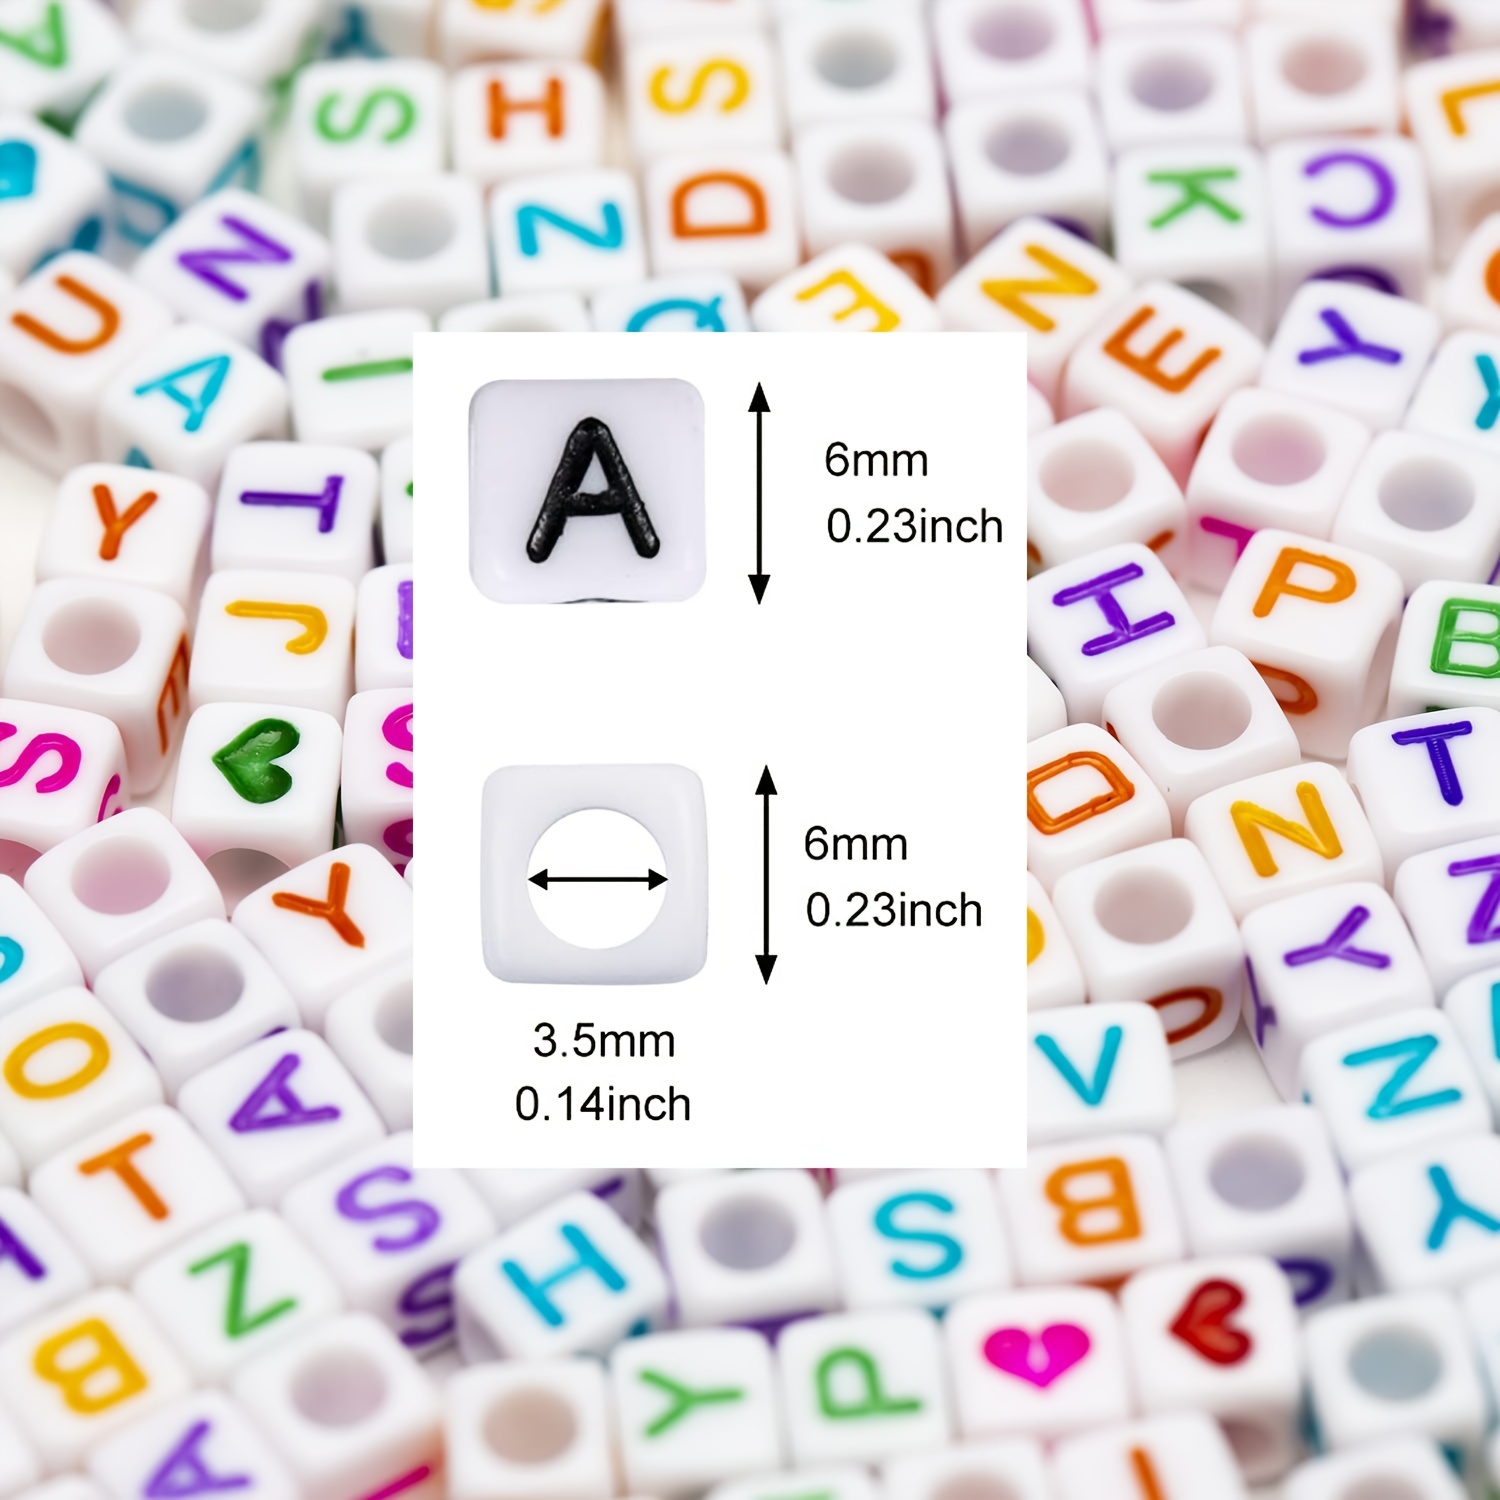  Acrylic Letter Beads Kit for Jewelry Making,Acrylic Round  Letter Beads for Bracelets and Jewelry Making in Multiple Color Available  (B) : Arts, Crafts & Sewing